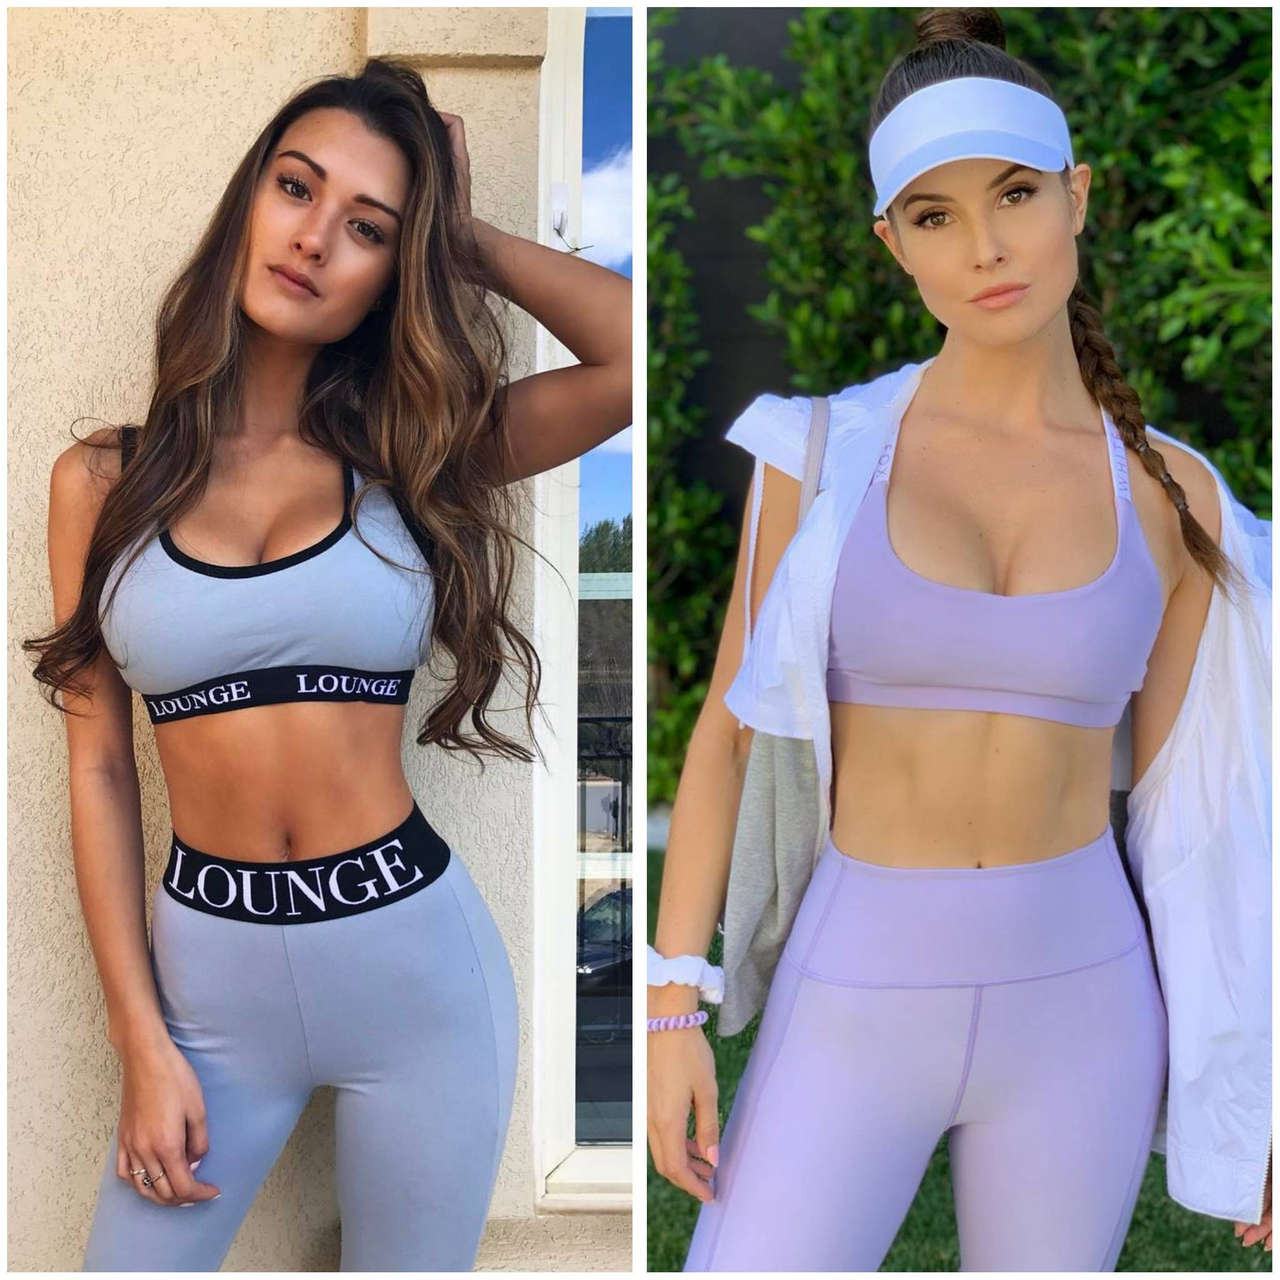 Who Would Win If These Two Were To Fight Keilah Kang Vs Amanda Cerny NSF